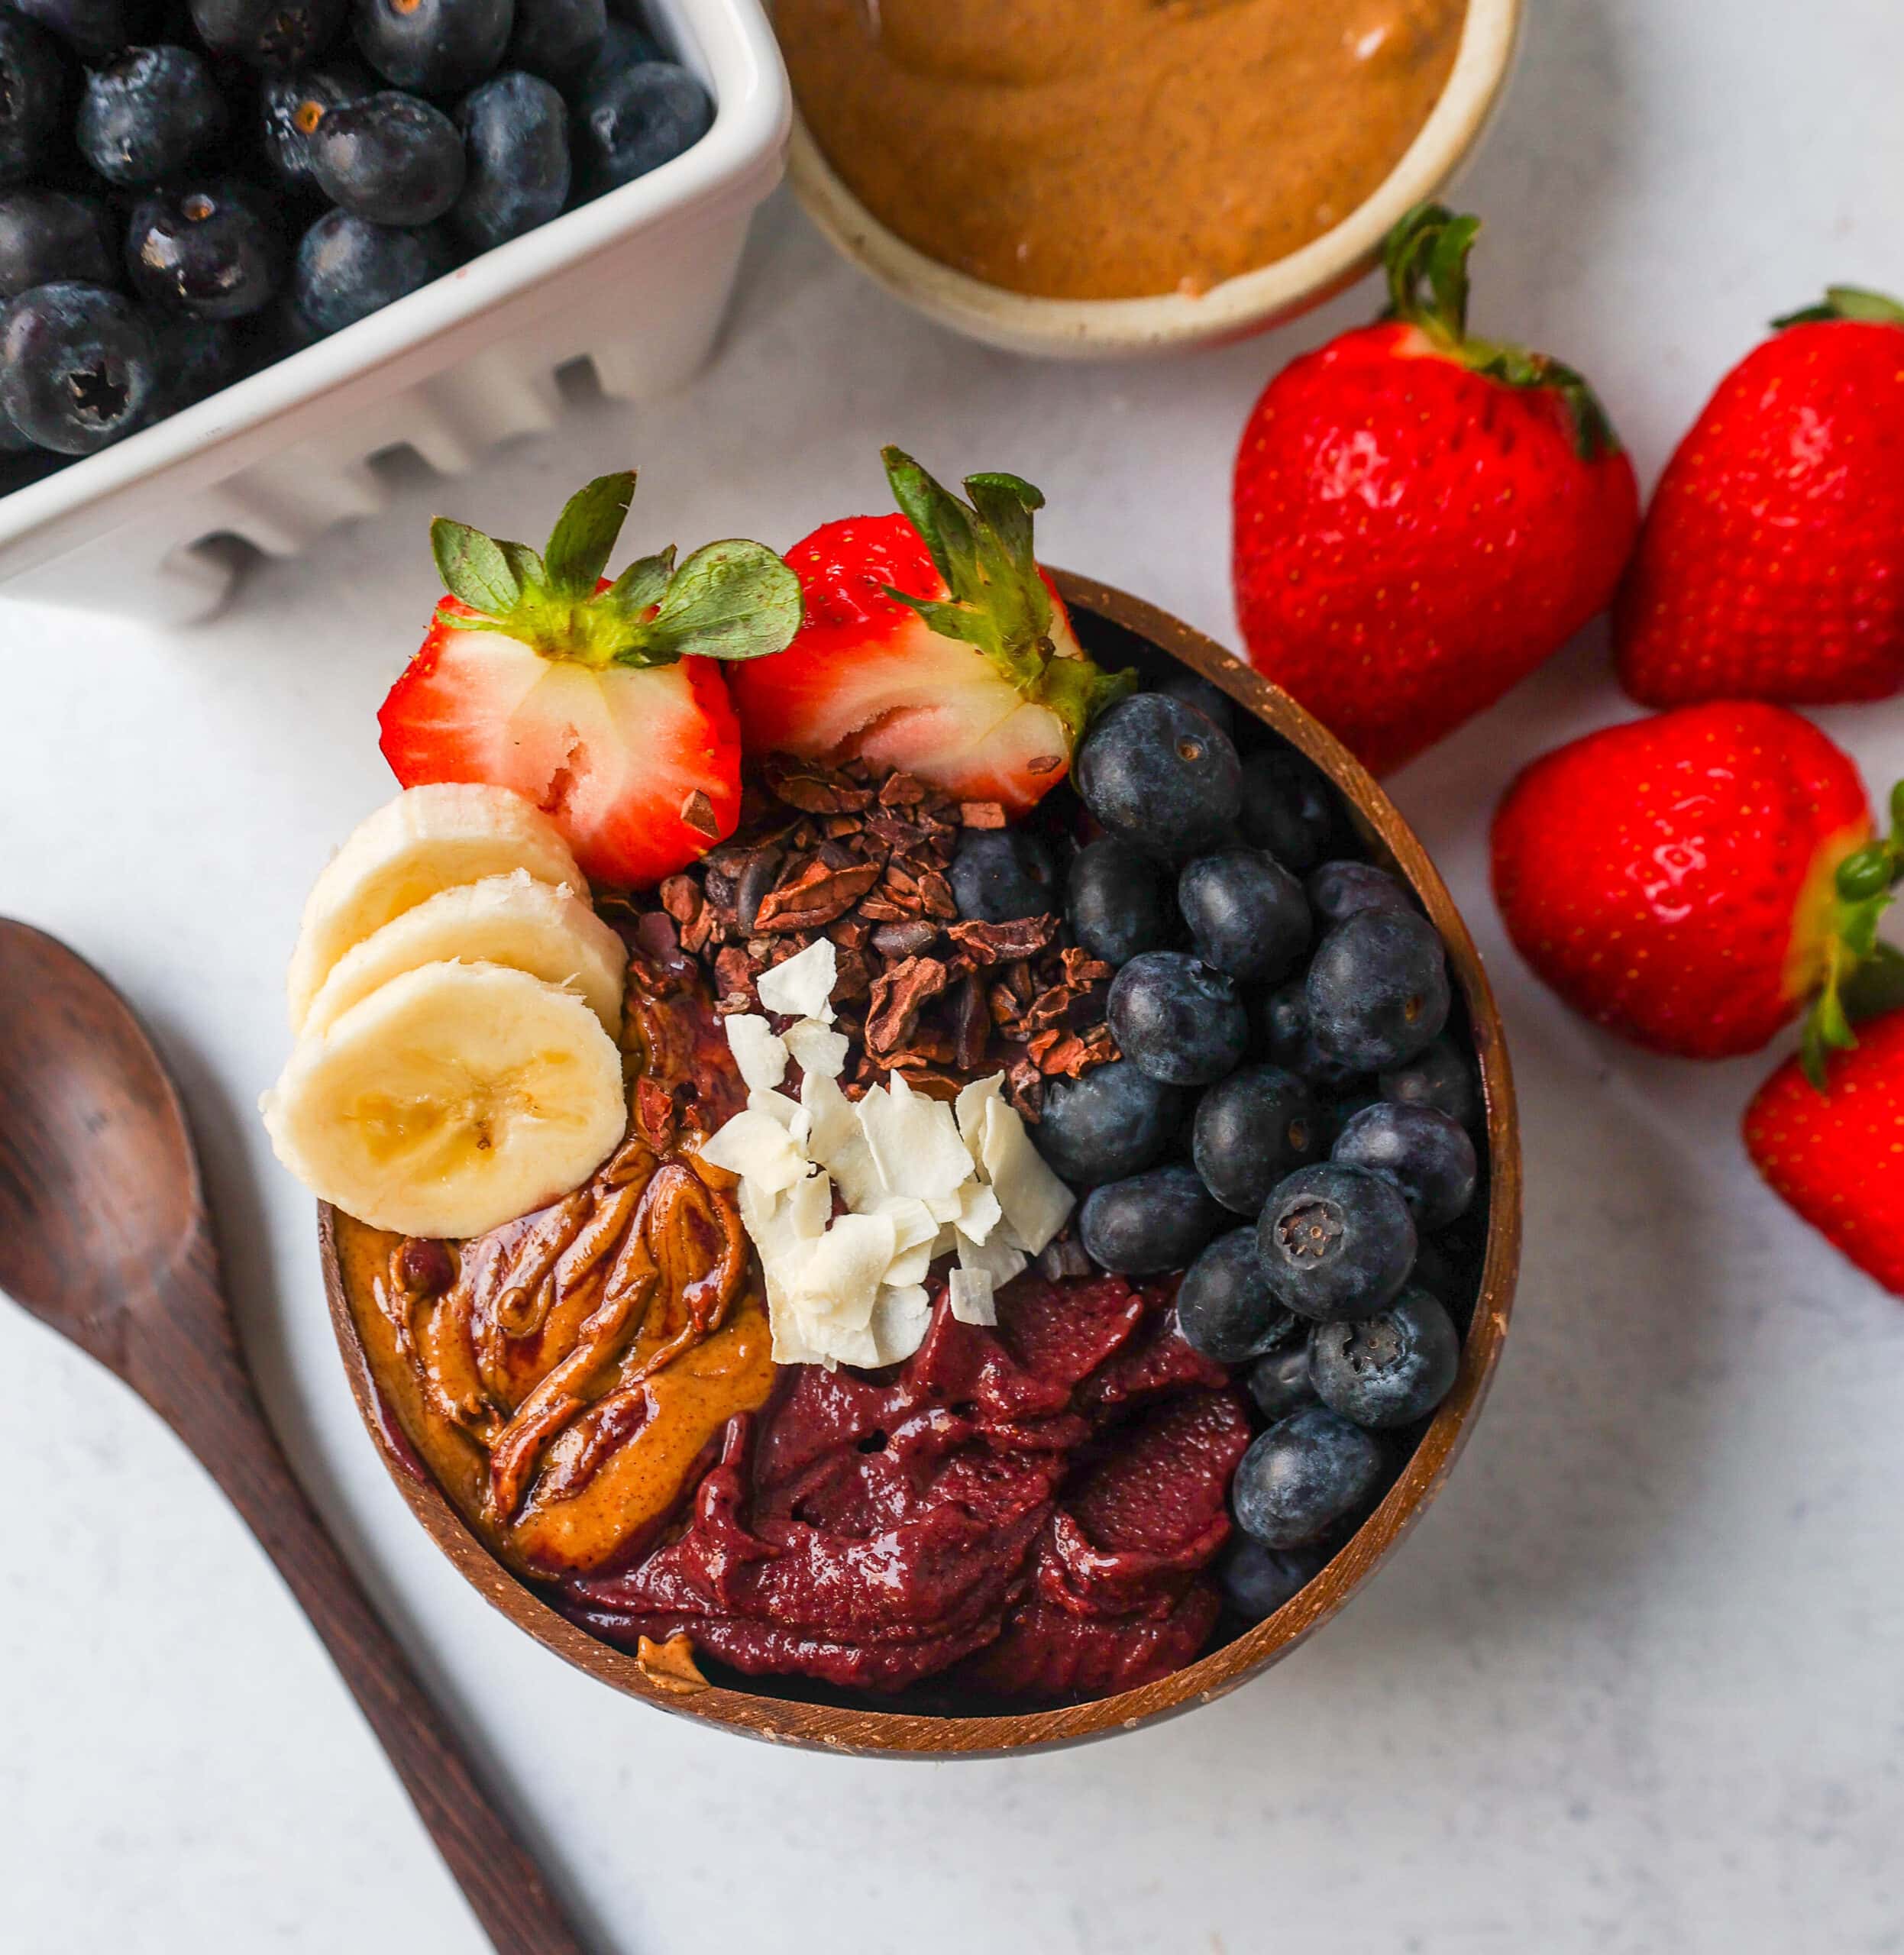 Homemade Acai Bowl Recipe is made with a Brazilian berry mixed with frozen fruits and topped with fresh fruit and granola. I will share tips on how to make the popular acai smoothie bowls at home for a fraction of the price.